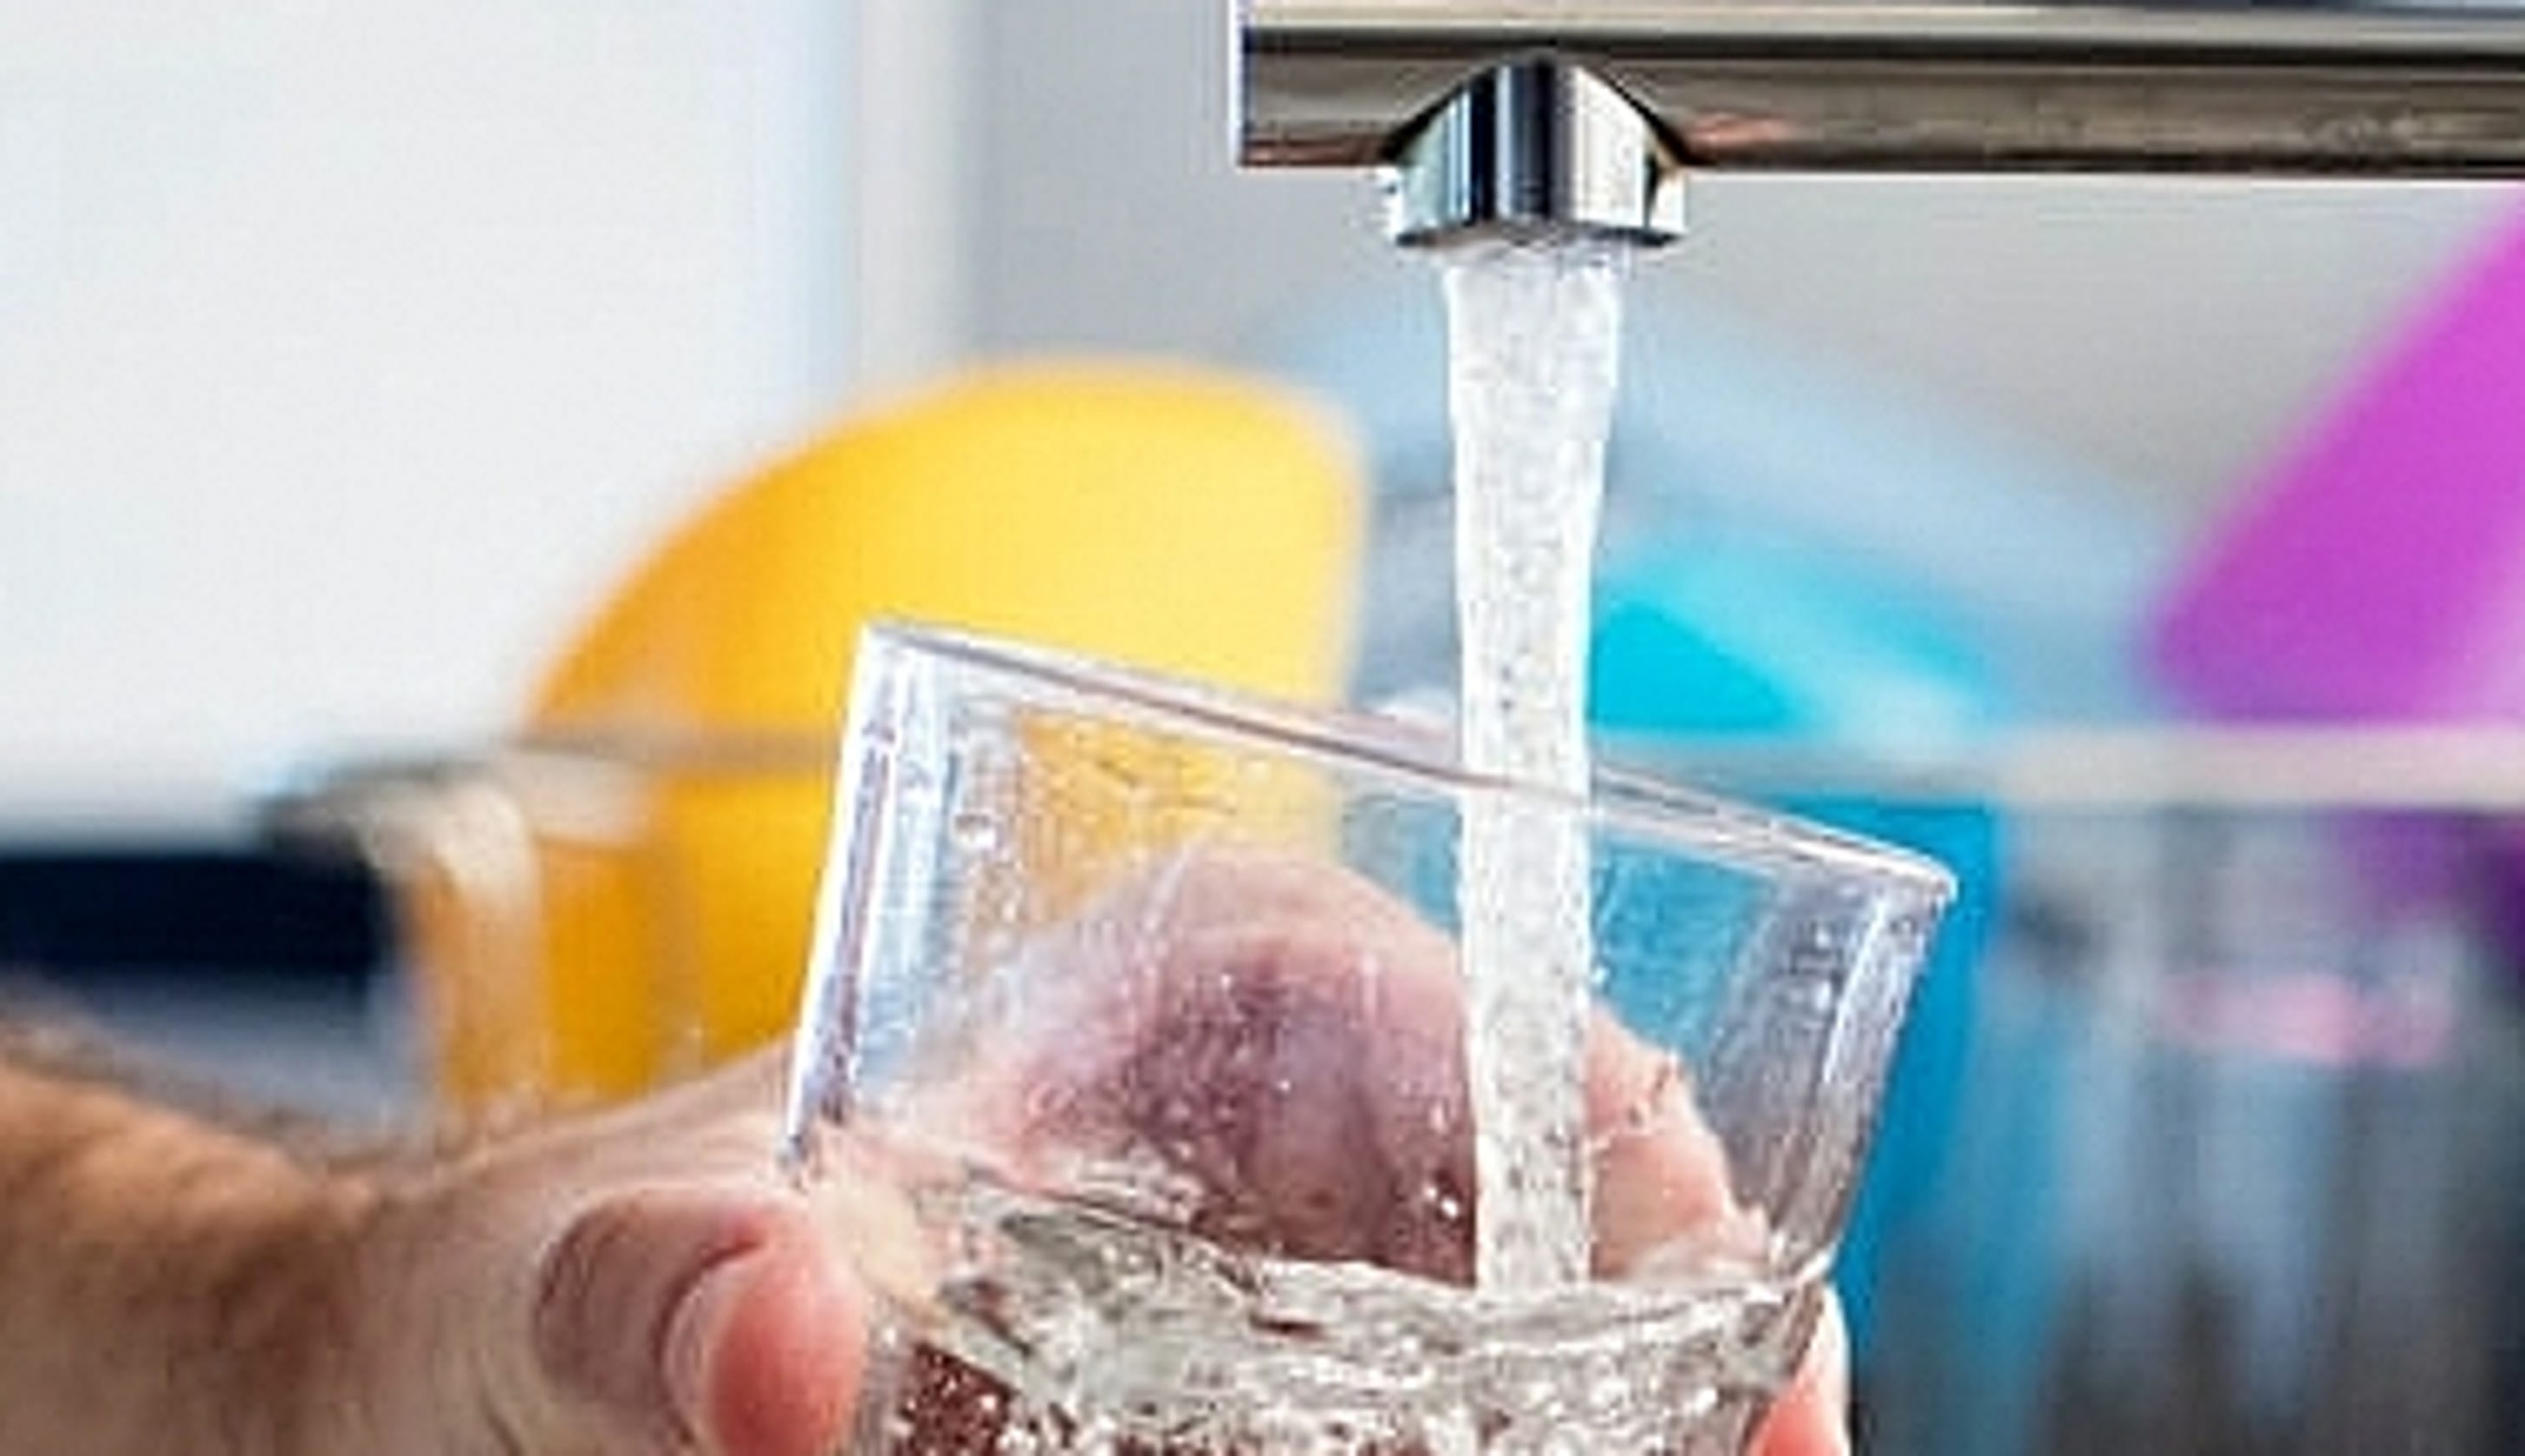 ‘Meets all government standards’: Tap water study results might surprise you - The News Star